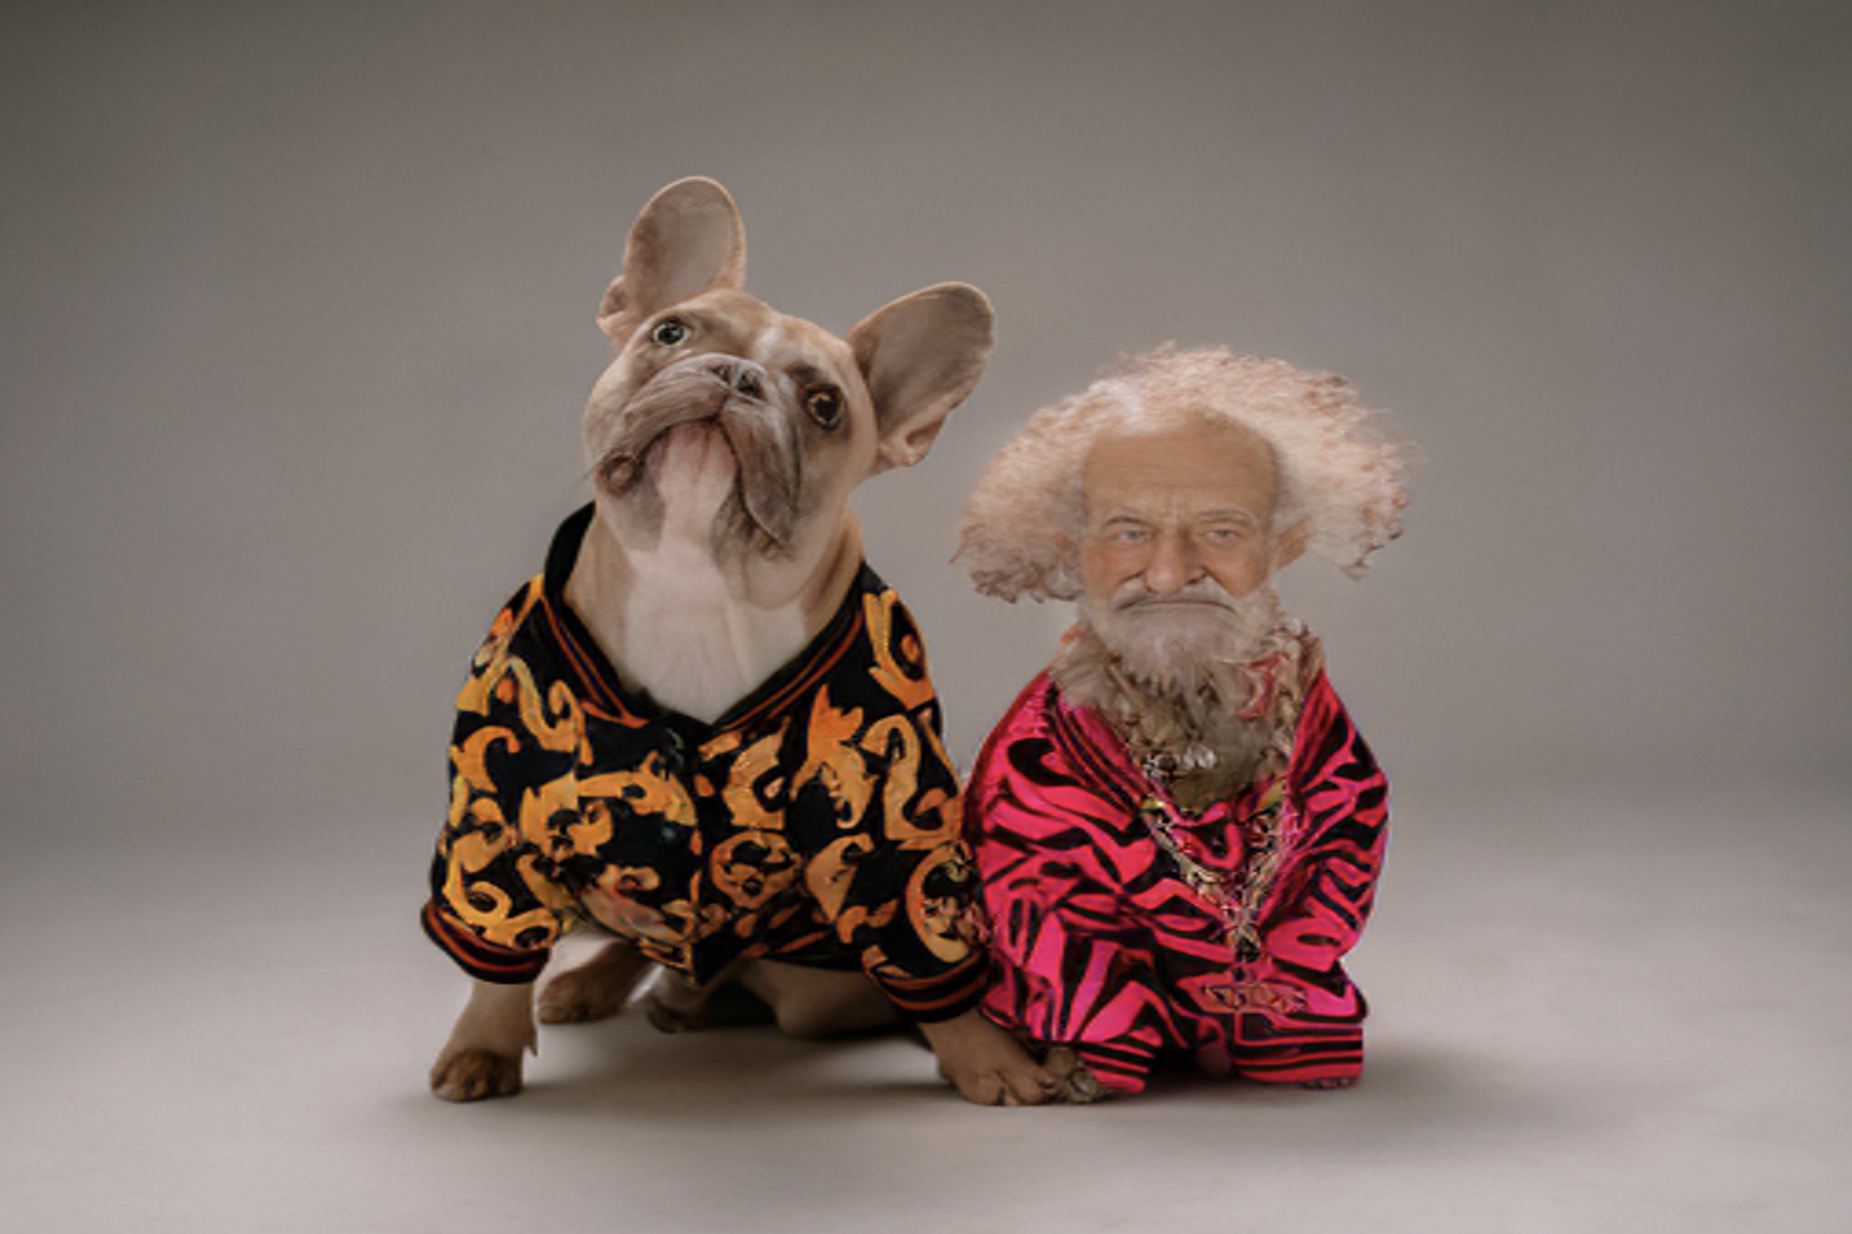 An image of our two dogs but the righthand dog's face has been replaced with the face of an old man.